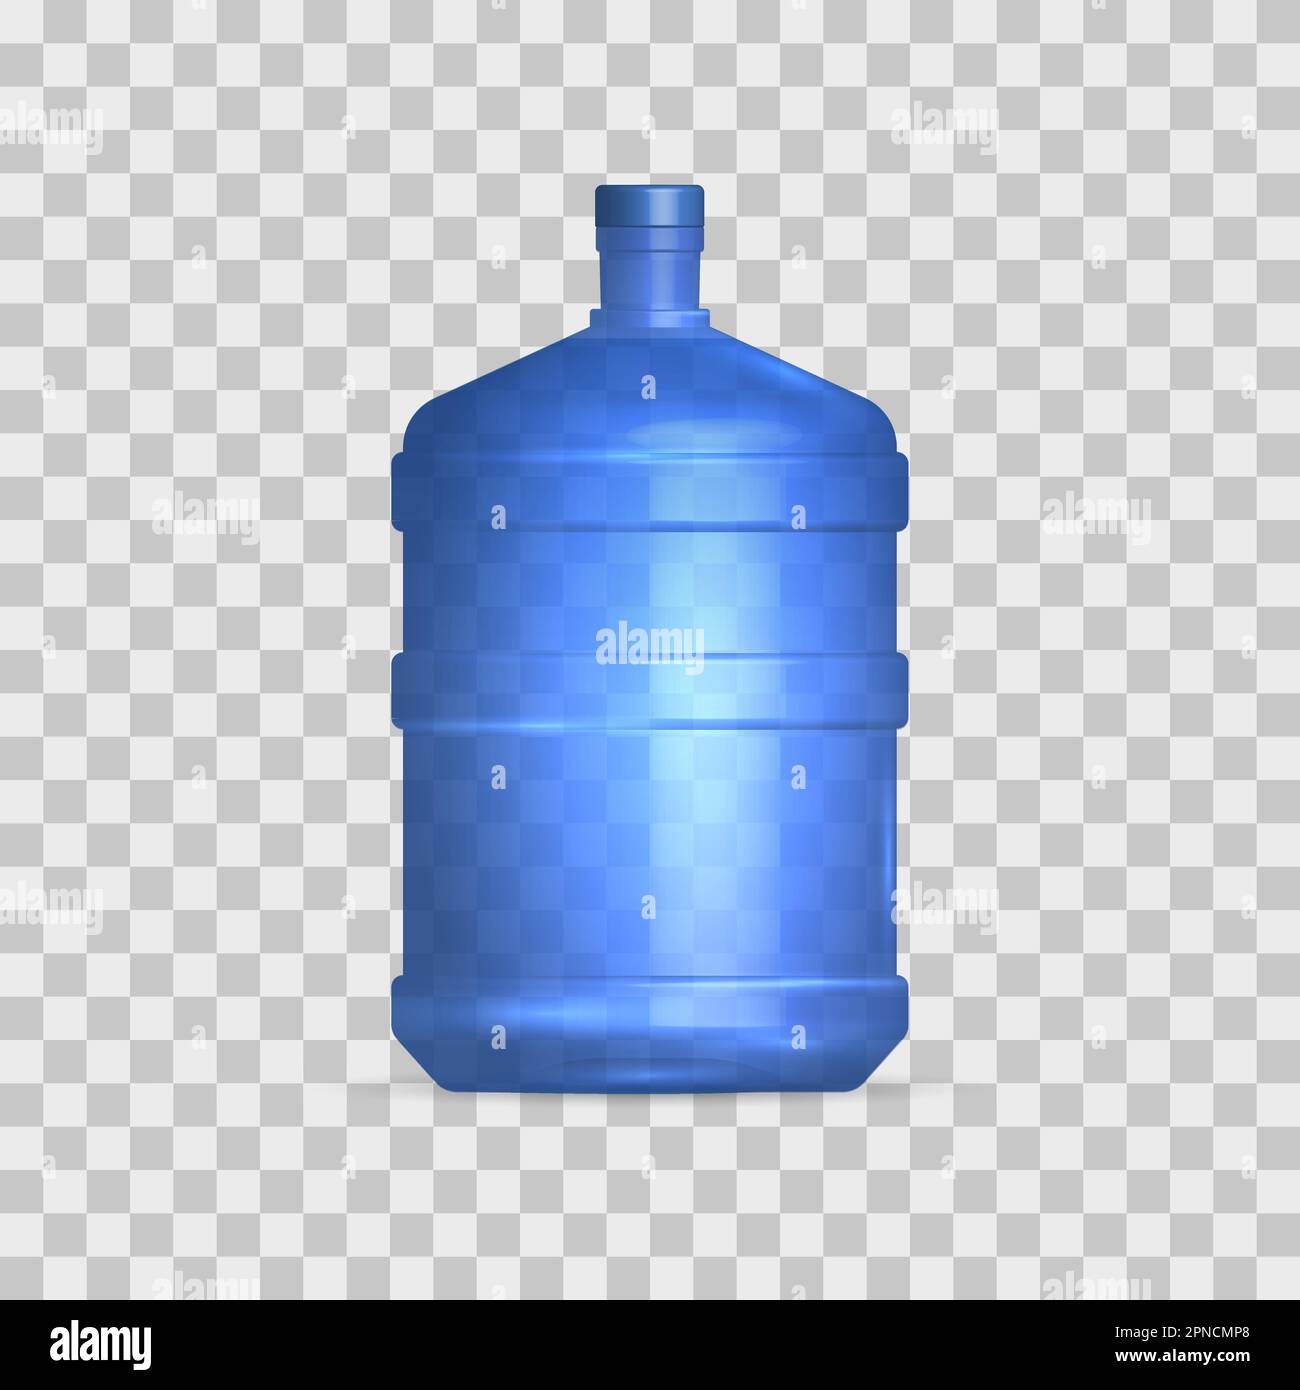 https://c8.alamy.com/comp/2PNCMP8/full-water-storage-bottle-isolated-on-white-background-front-view-3d-vector-illustration-2PNCMP8.jpg